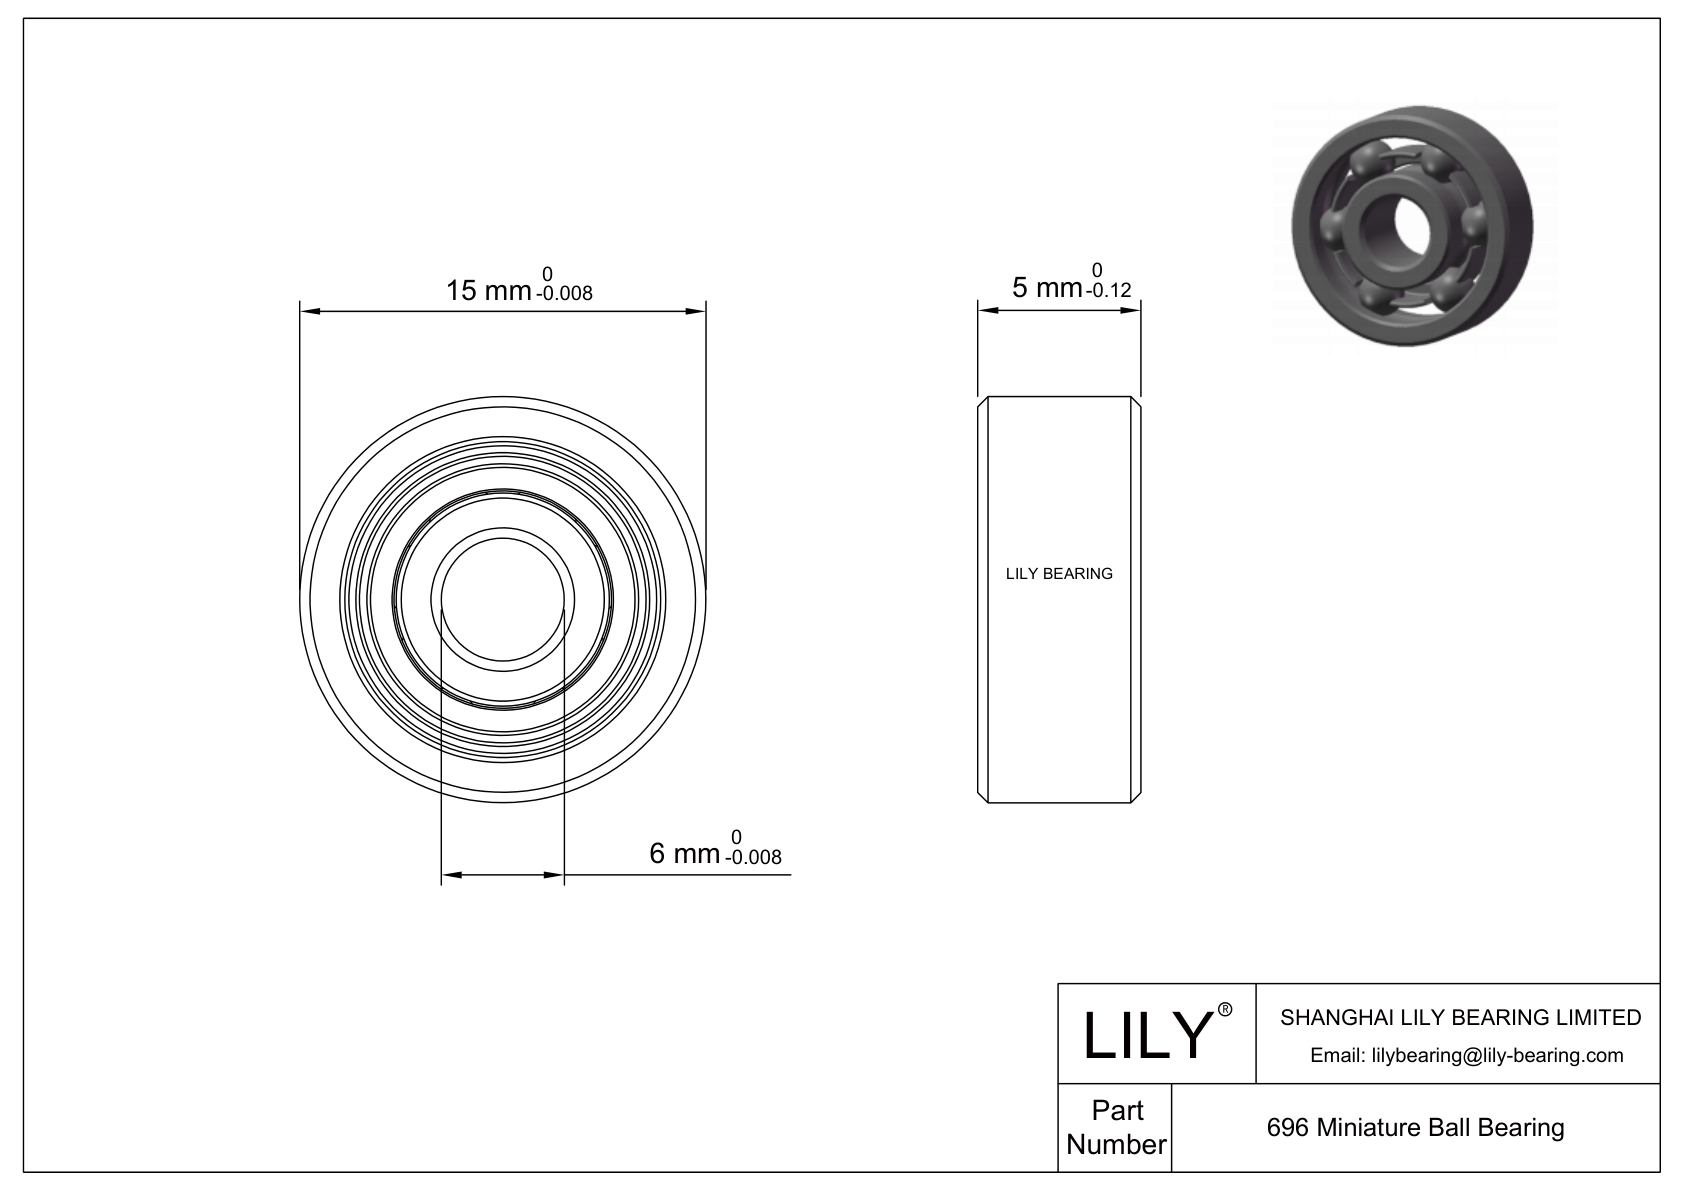 LILY-PU69622-5C1L8M6 Polyurethane Coated Bearing With Screw cad drawing